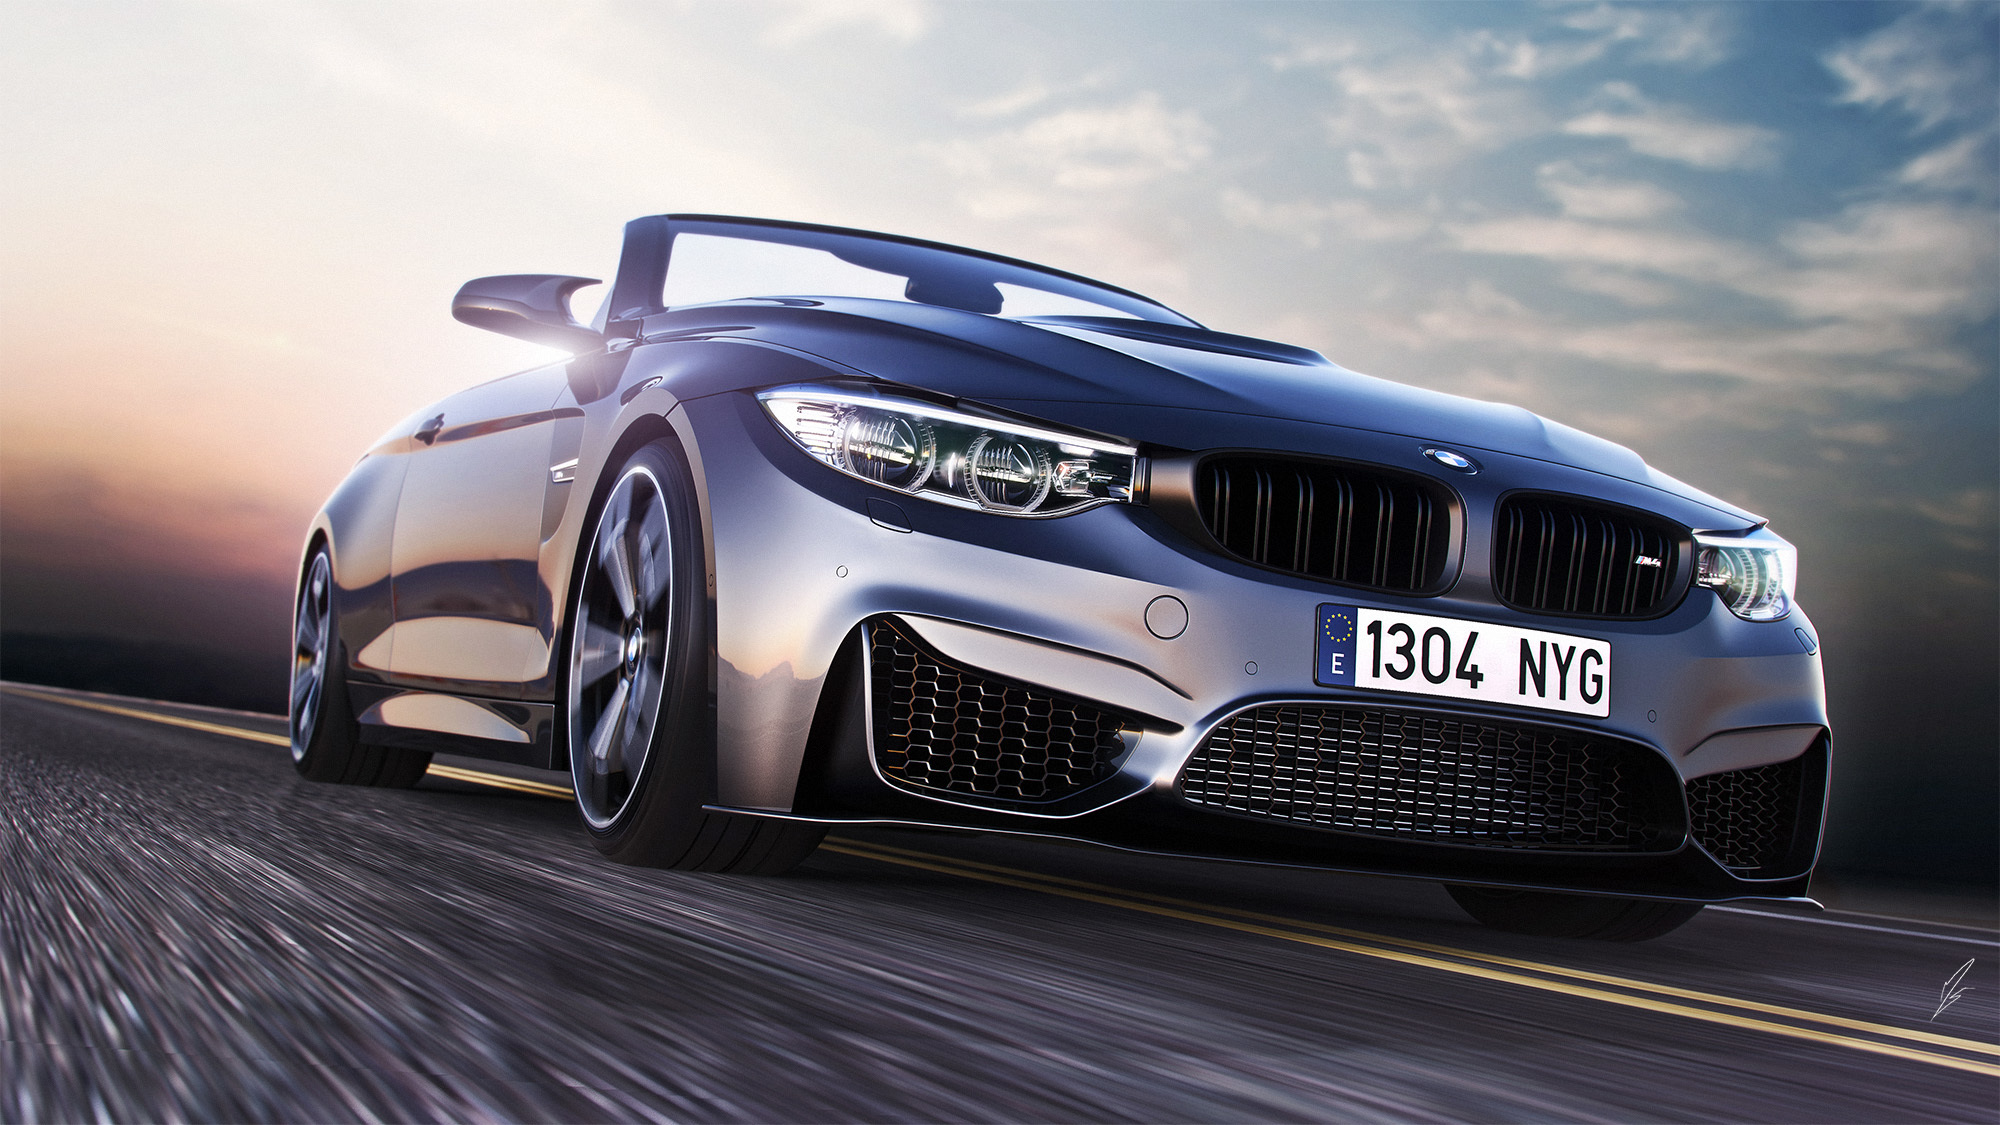 front view, bmw, cars, bumper, convertible, m4 Phone Background